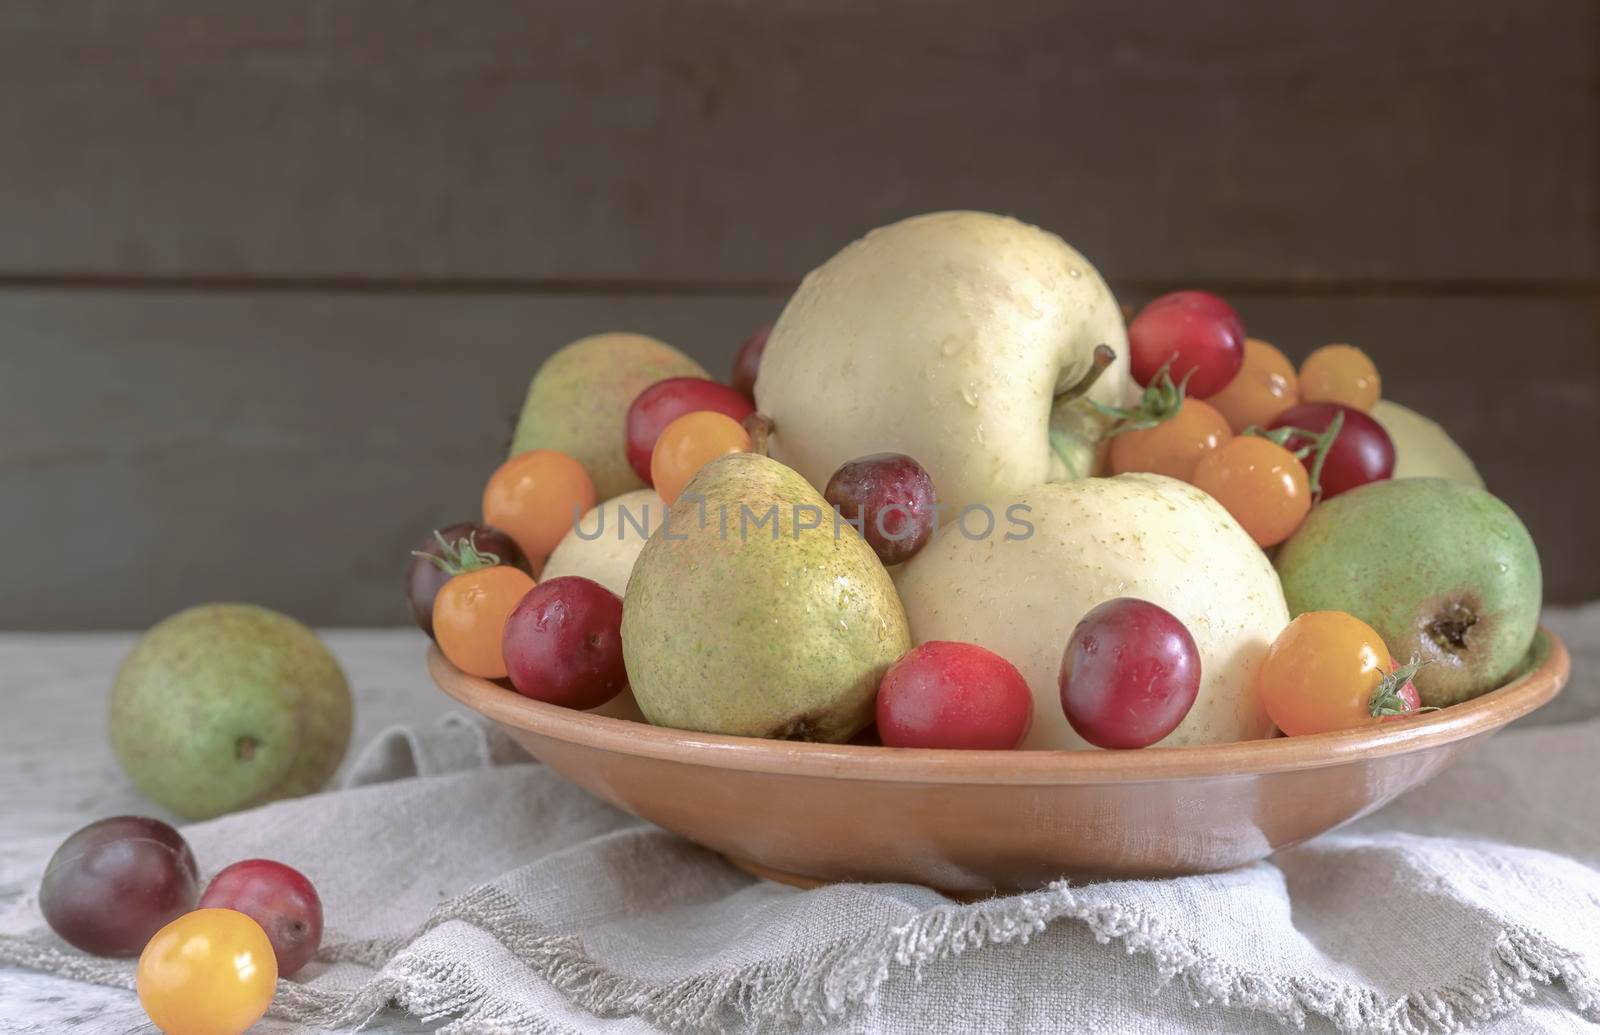 Still life: apples, pears, plums in a ceramic plate. Presented in close-up on a dark background. Front view, copy space